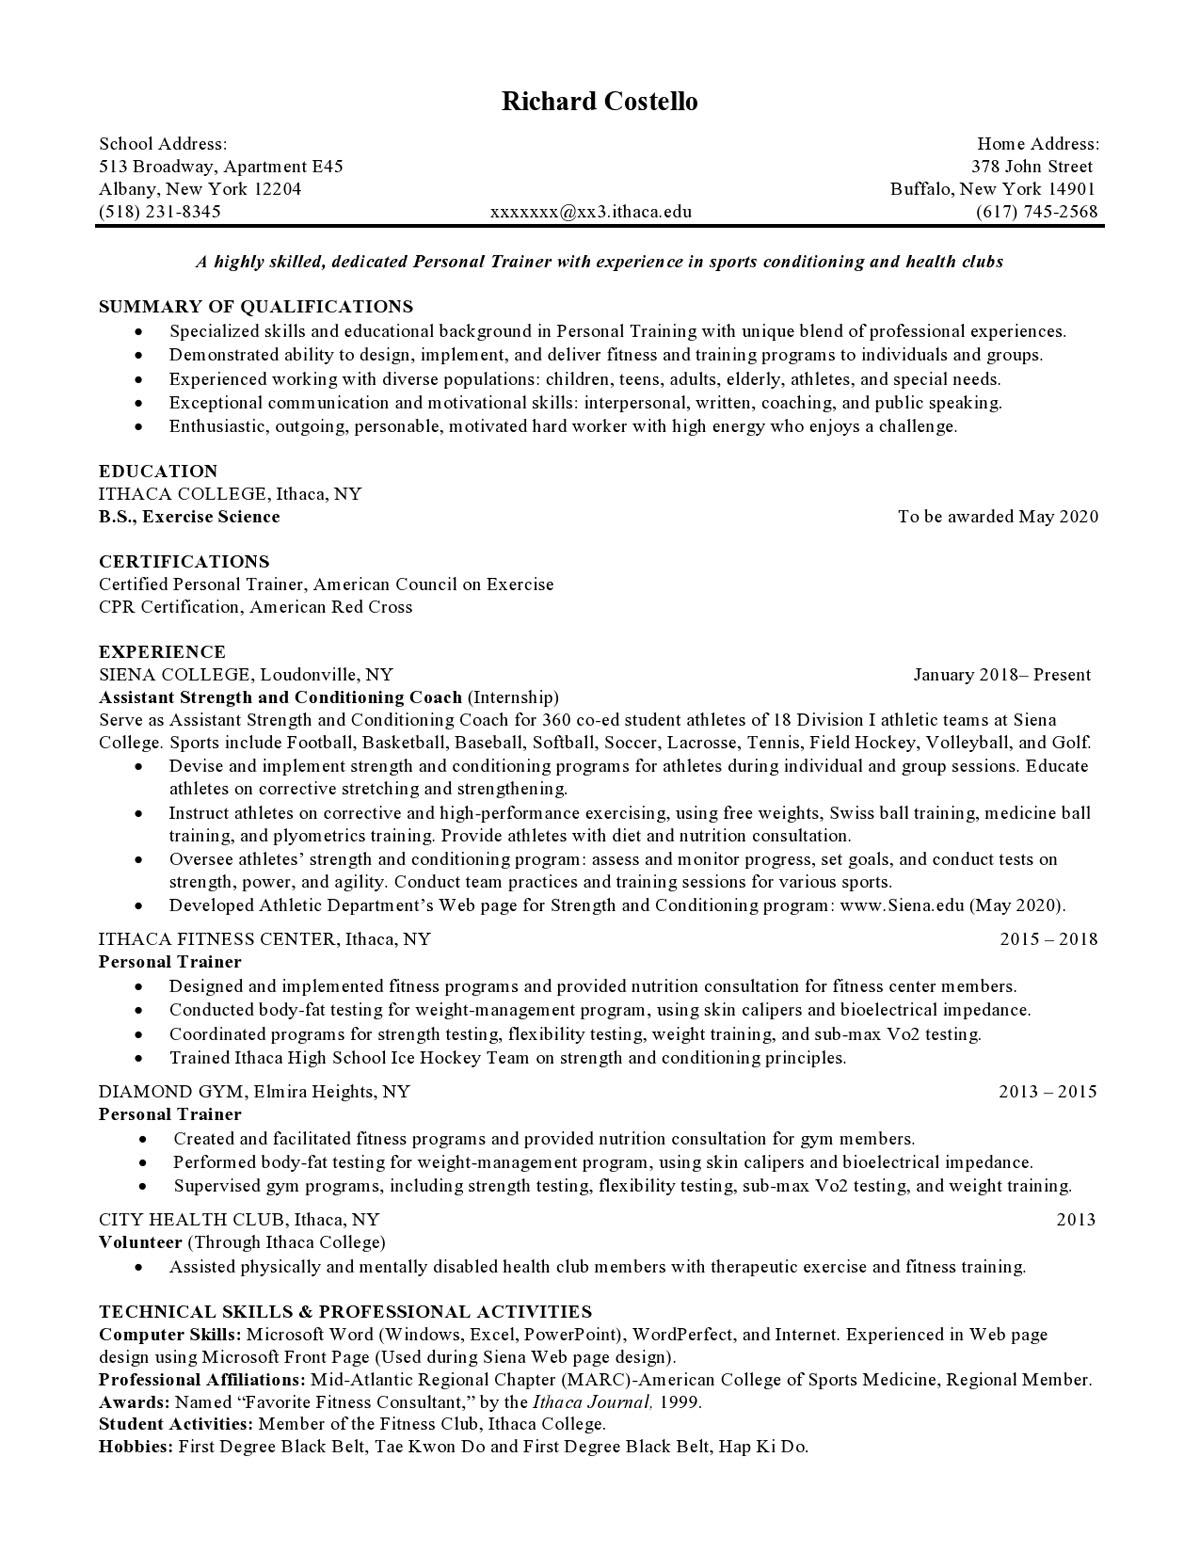 Sample resume: Personal Training, Mid Experience, Chronological